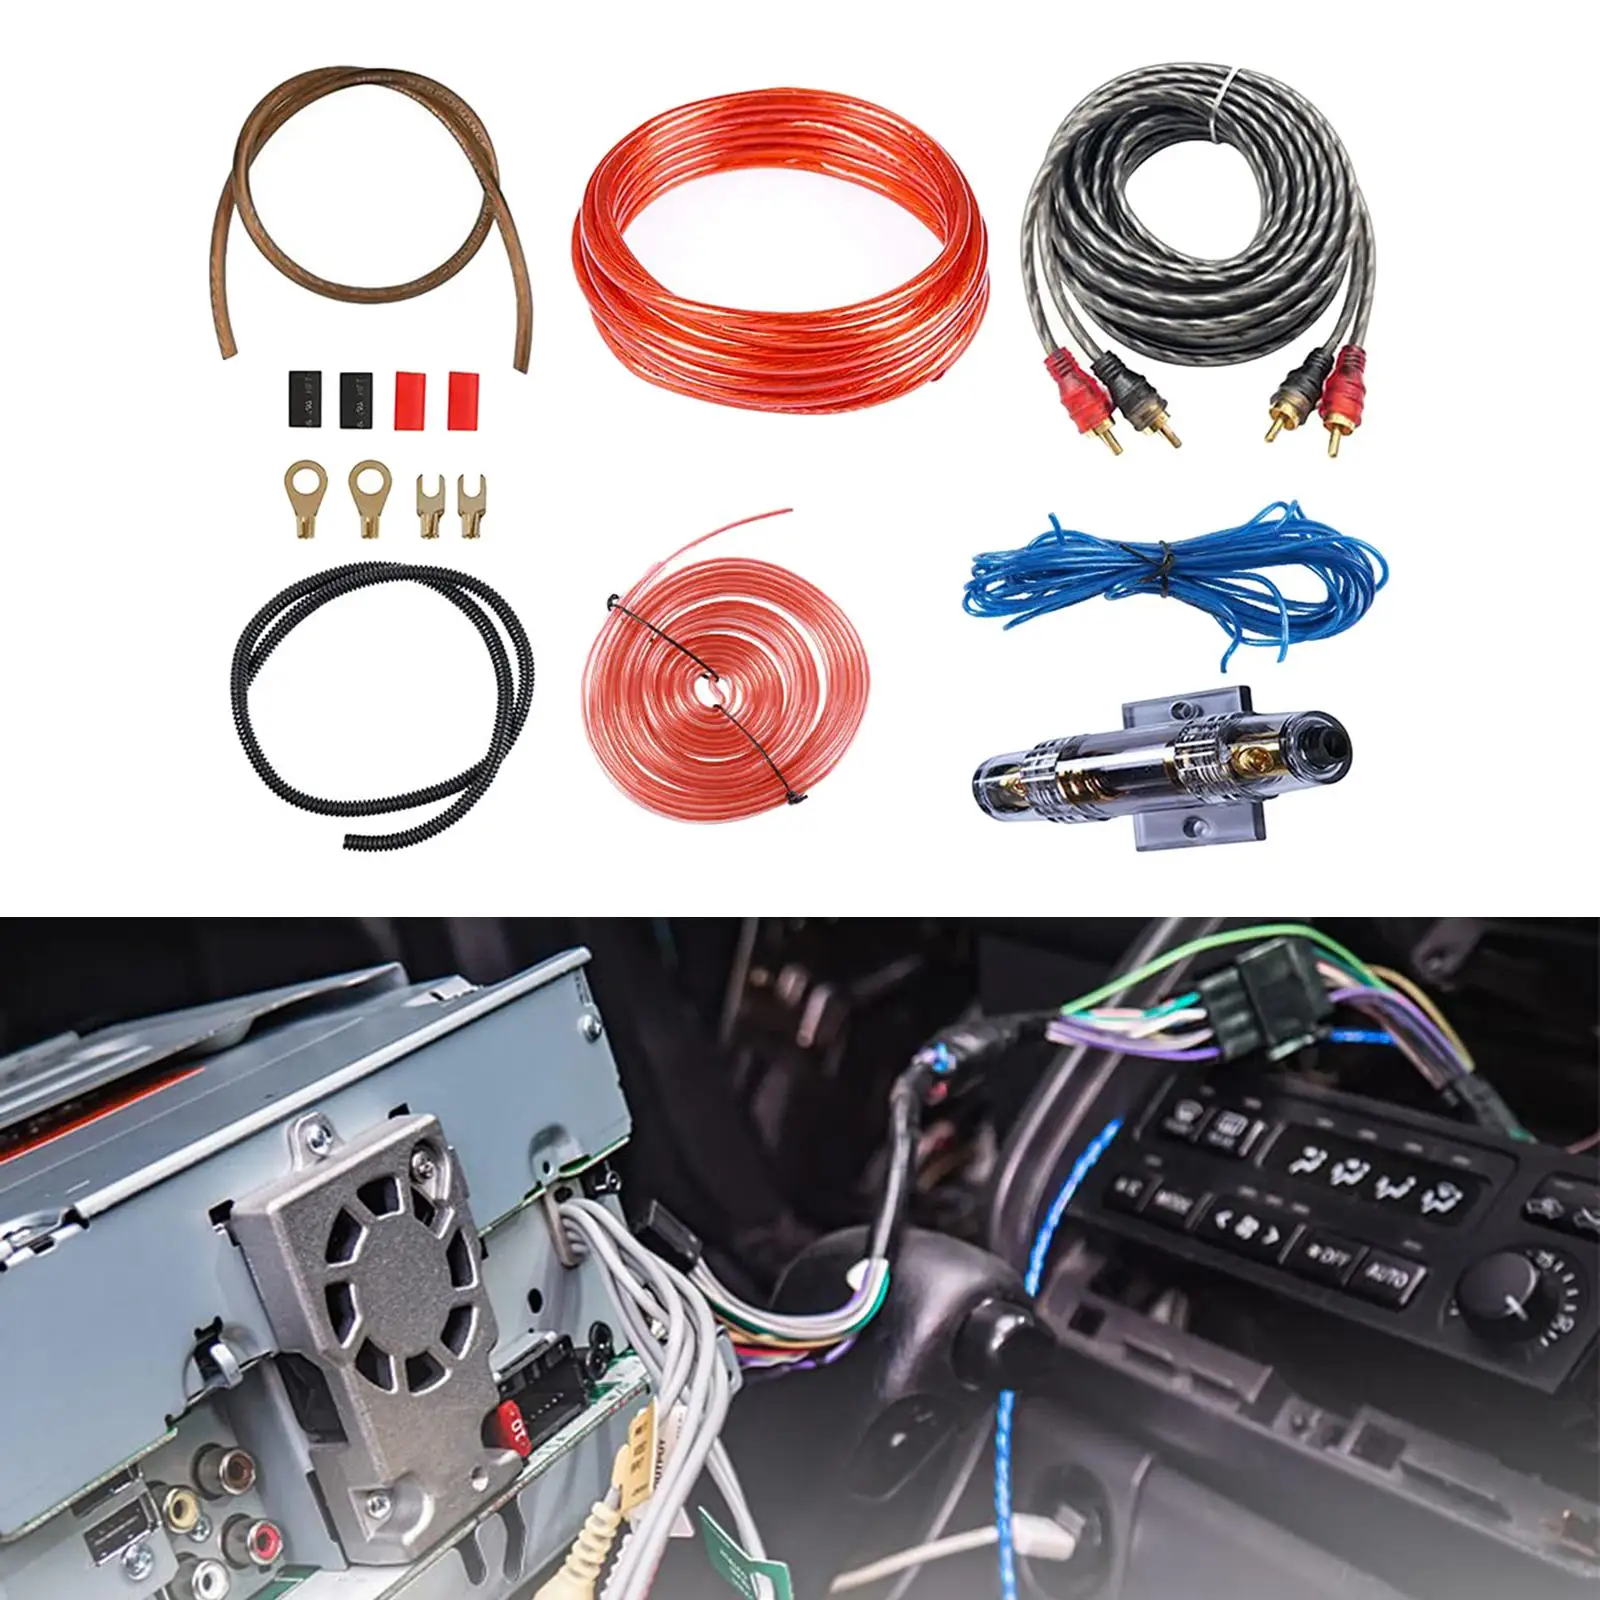 Car Audio Wiring Kit, Amplifier Subwoofer Installation Kit Stereo Speaker Cable Power Cable